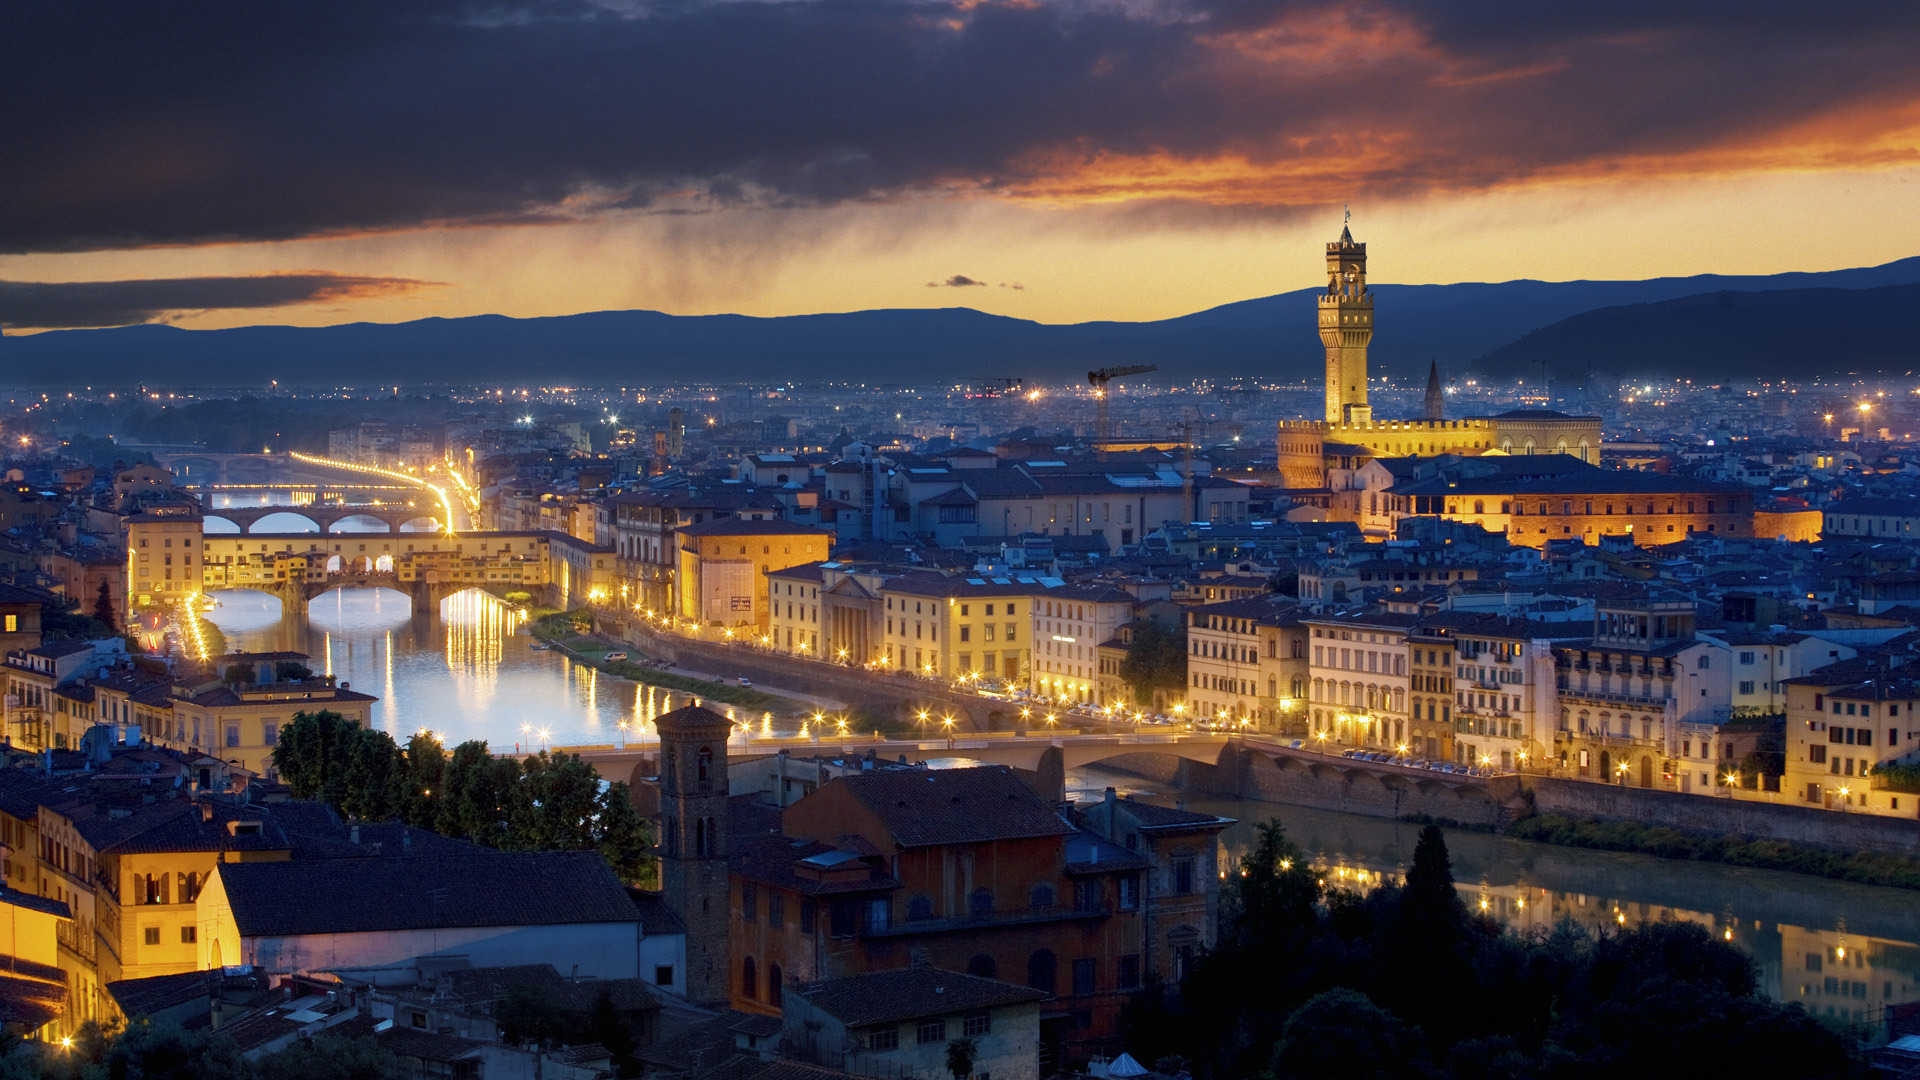 Related Post "Florence City Free Wallpaper"